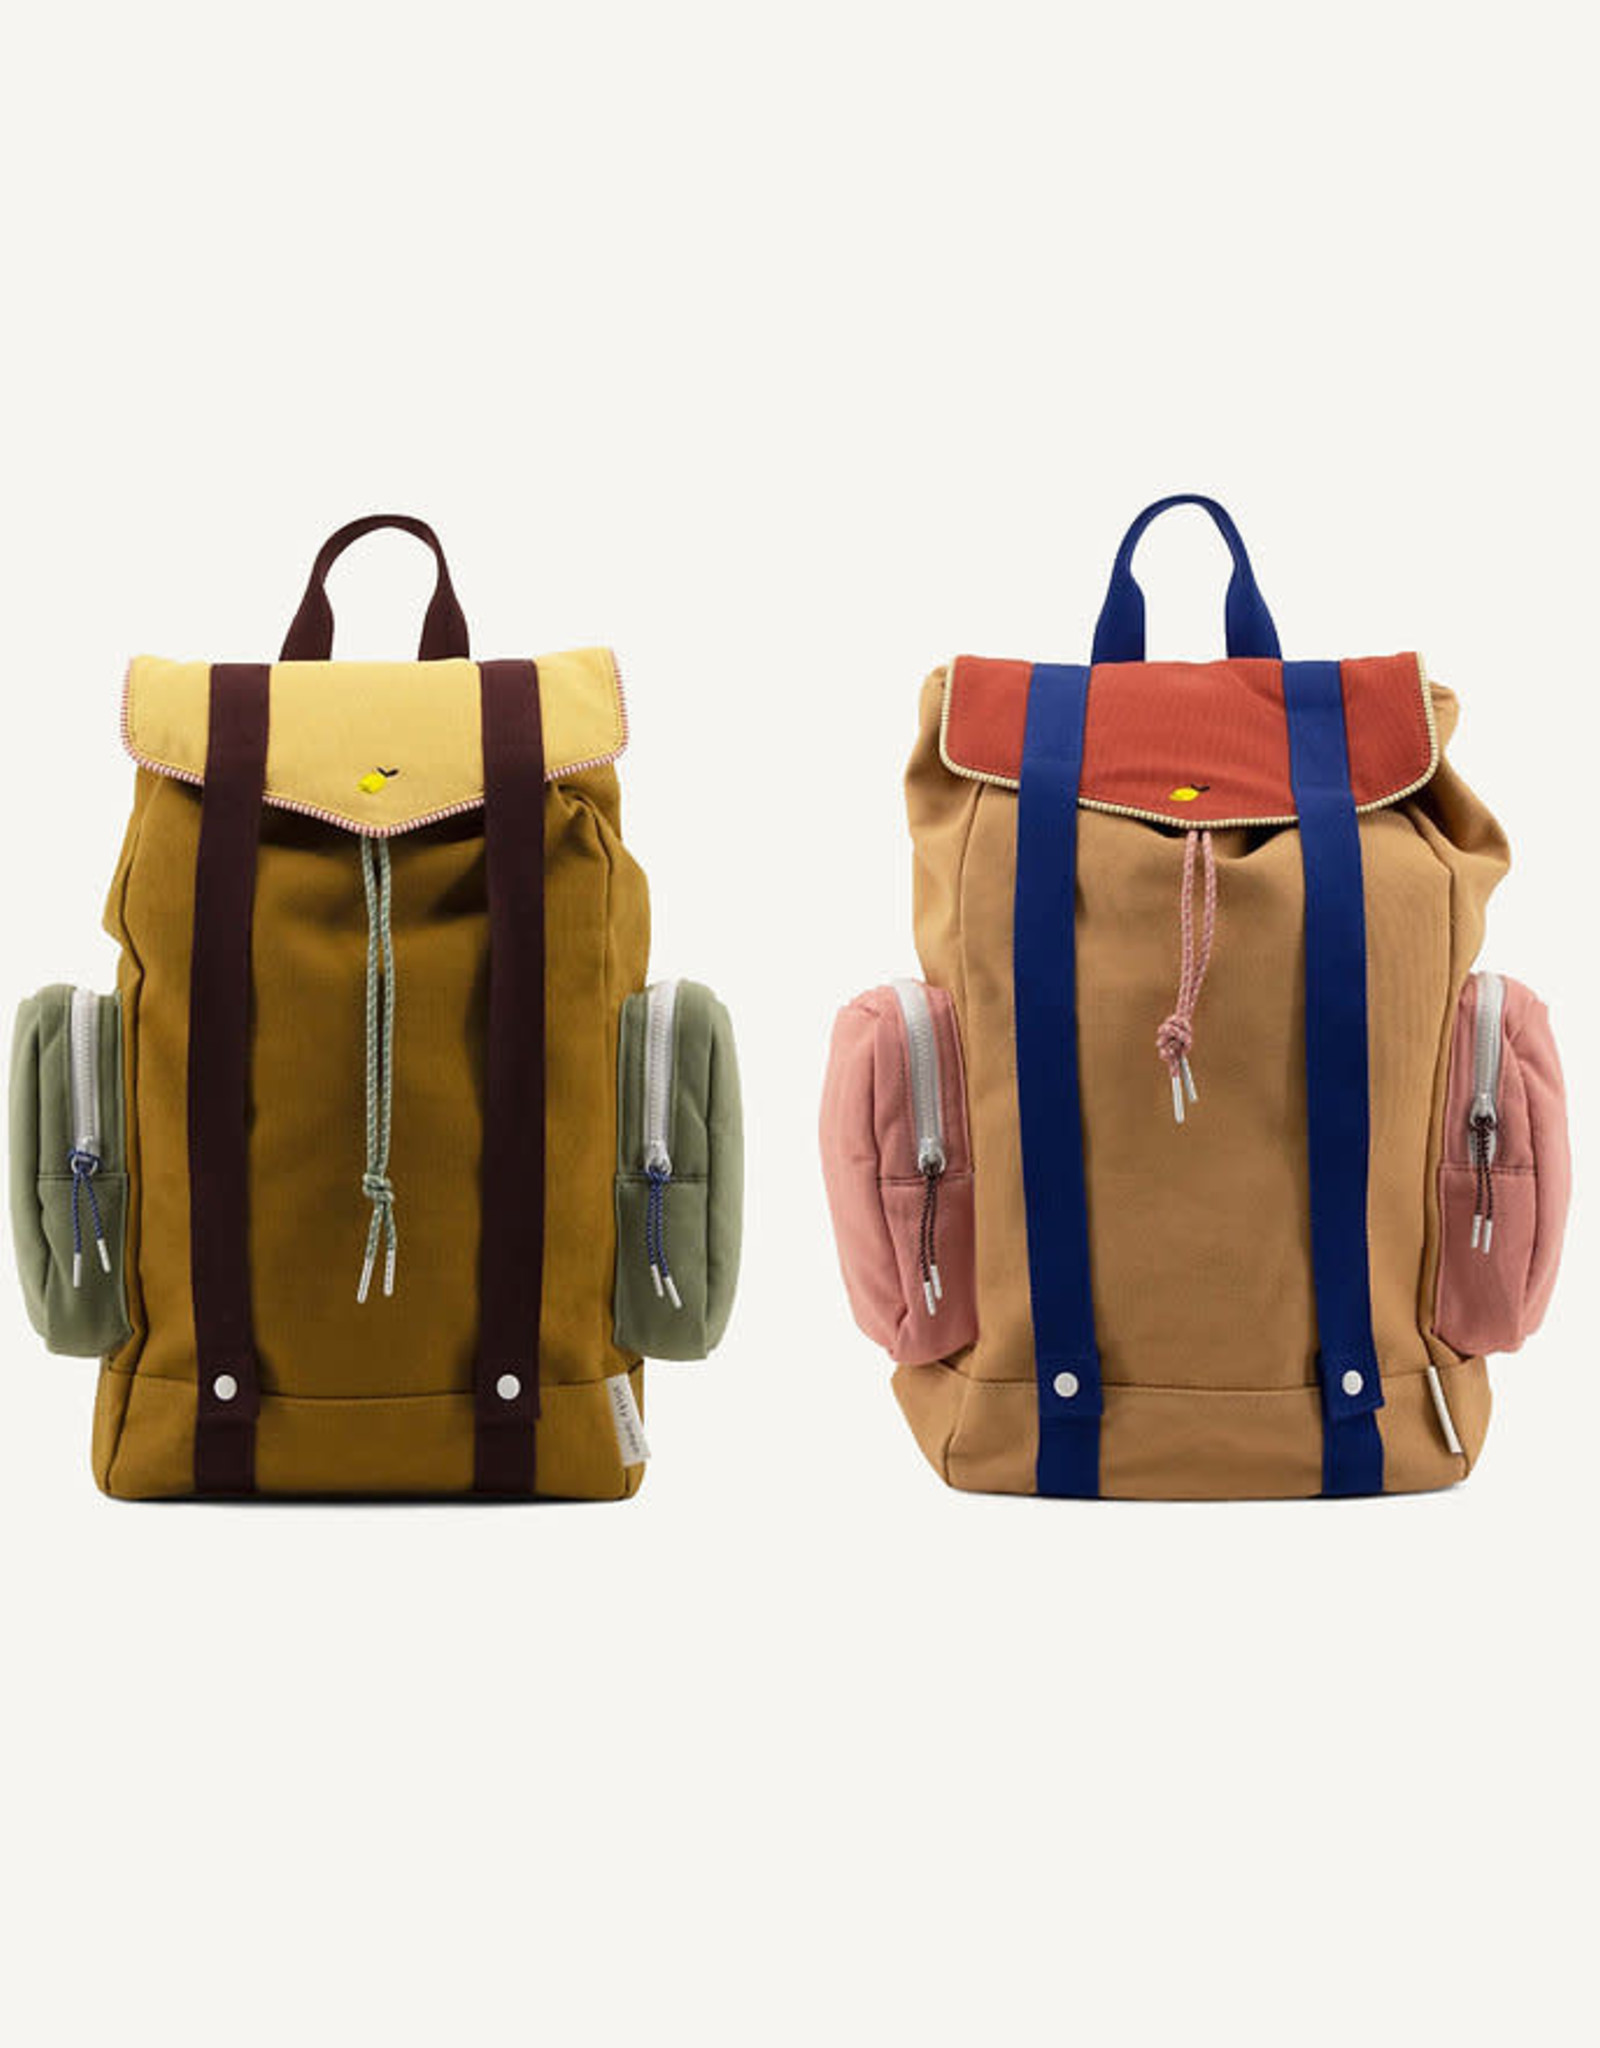 RGR Meadows Large Backpack - Assorted